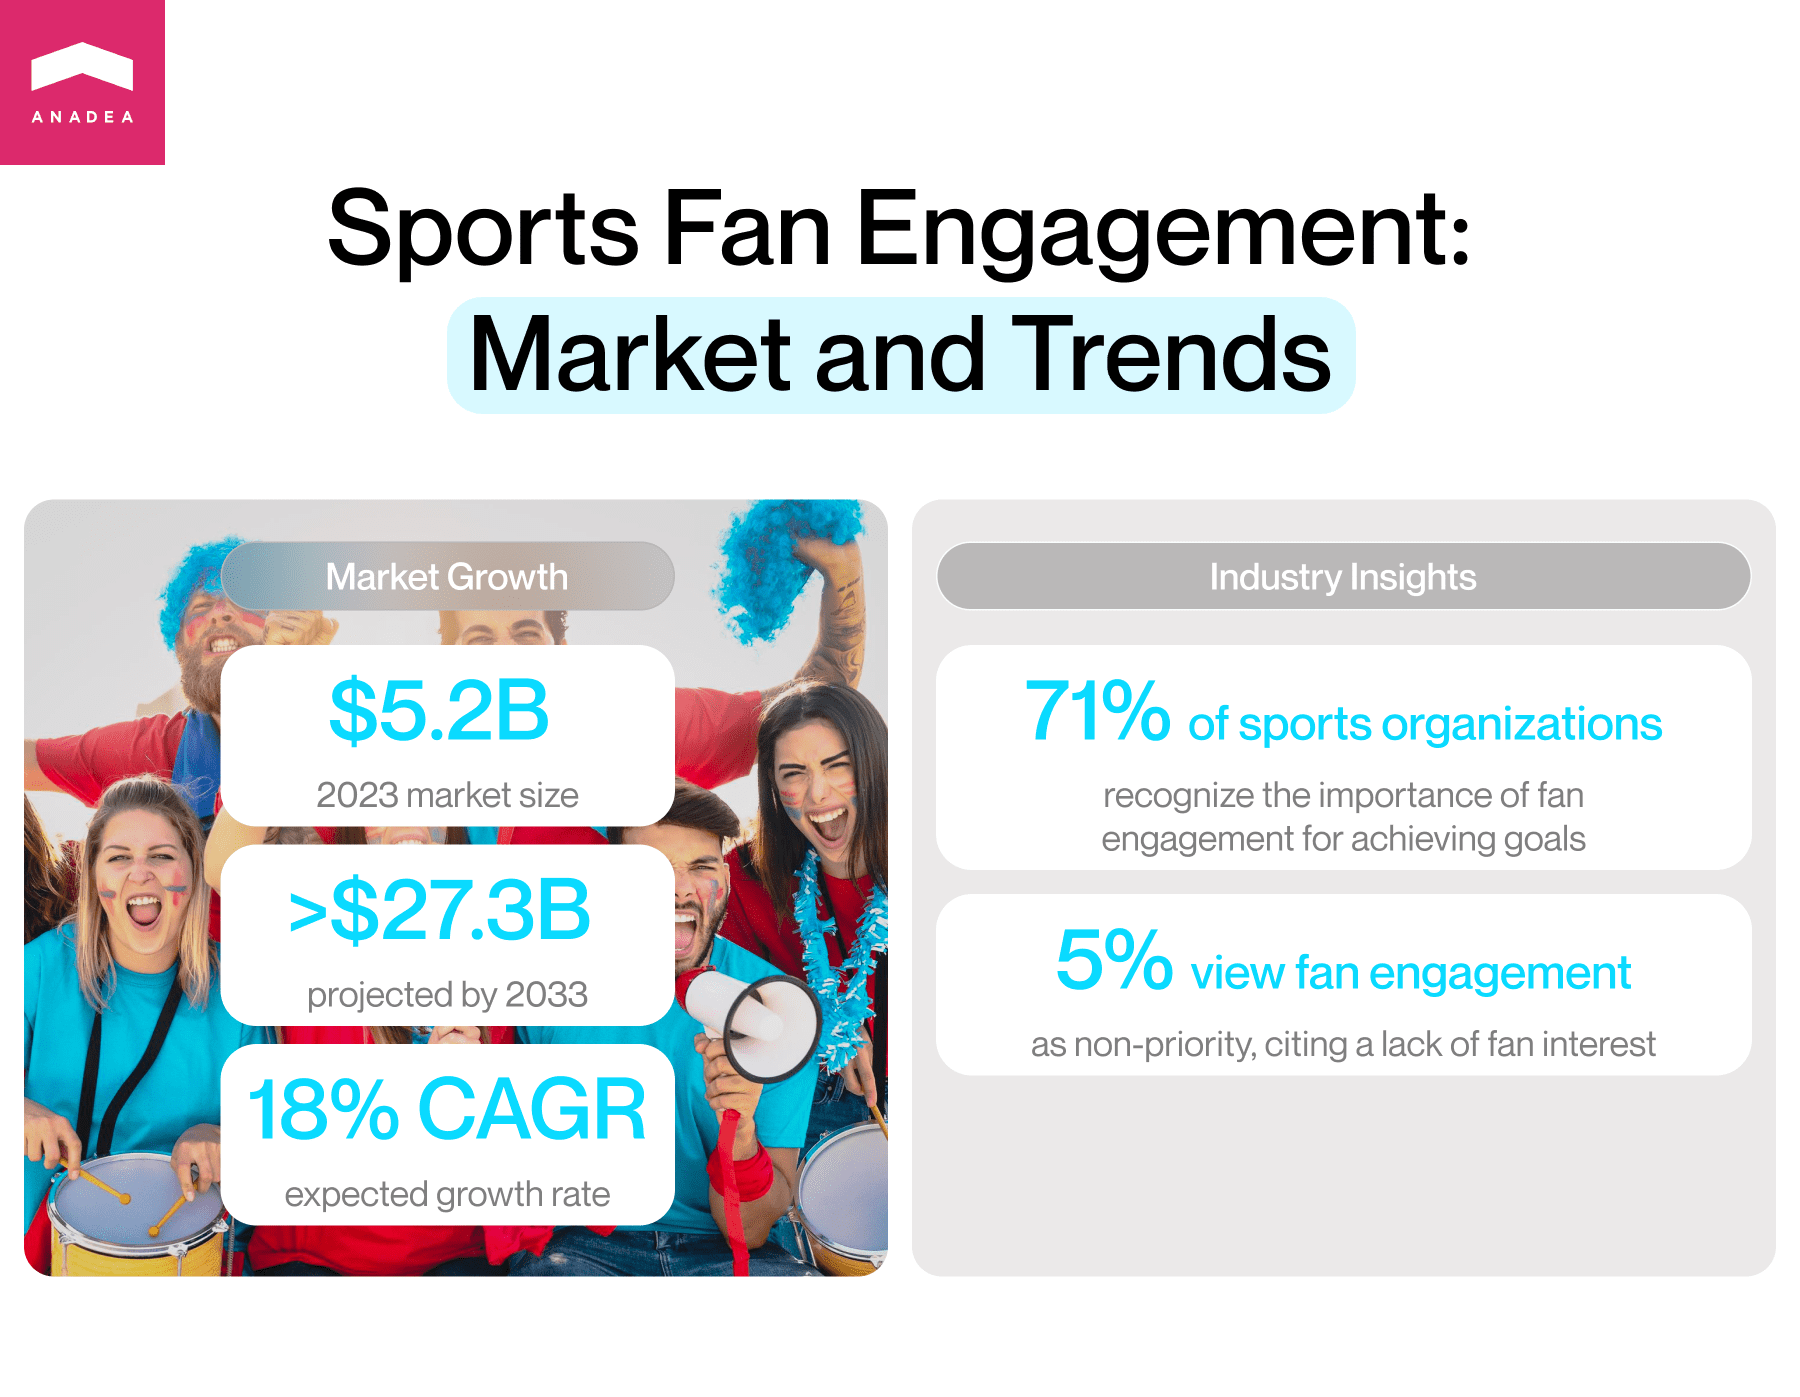 Sports fan engagement market and trends infographic